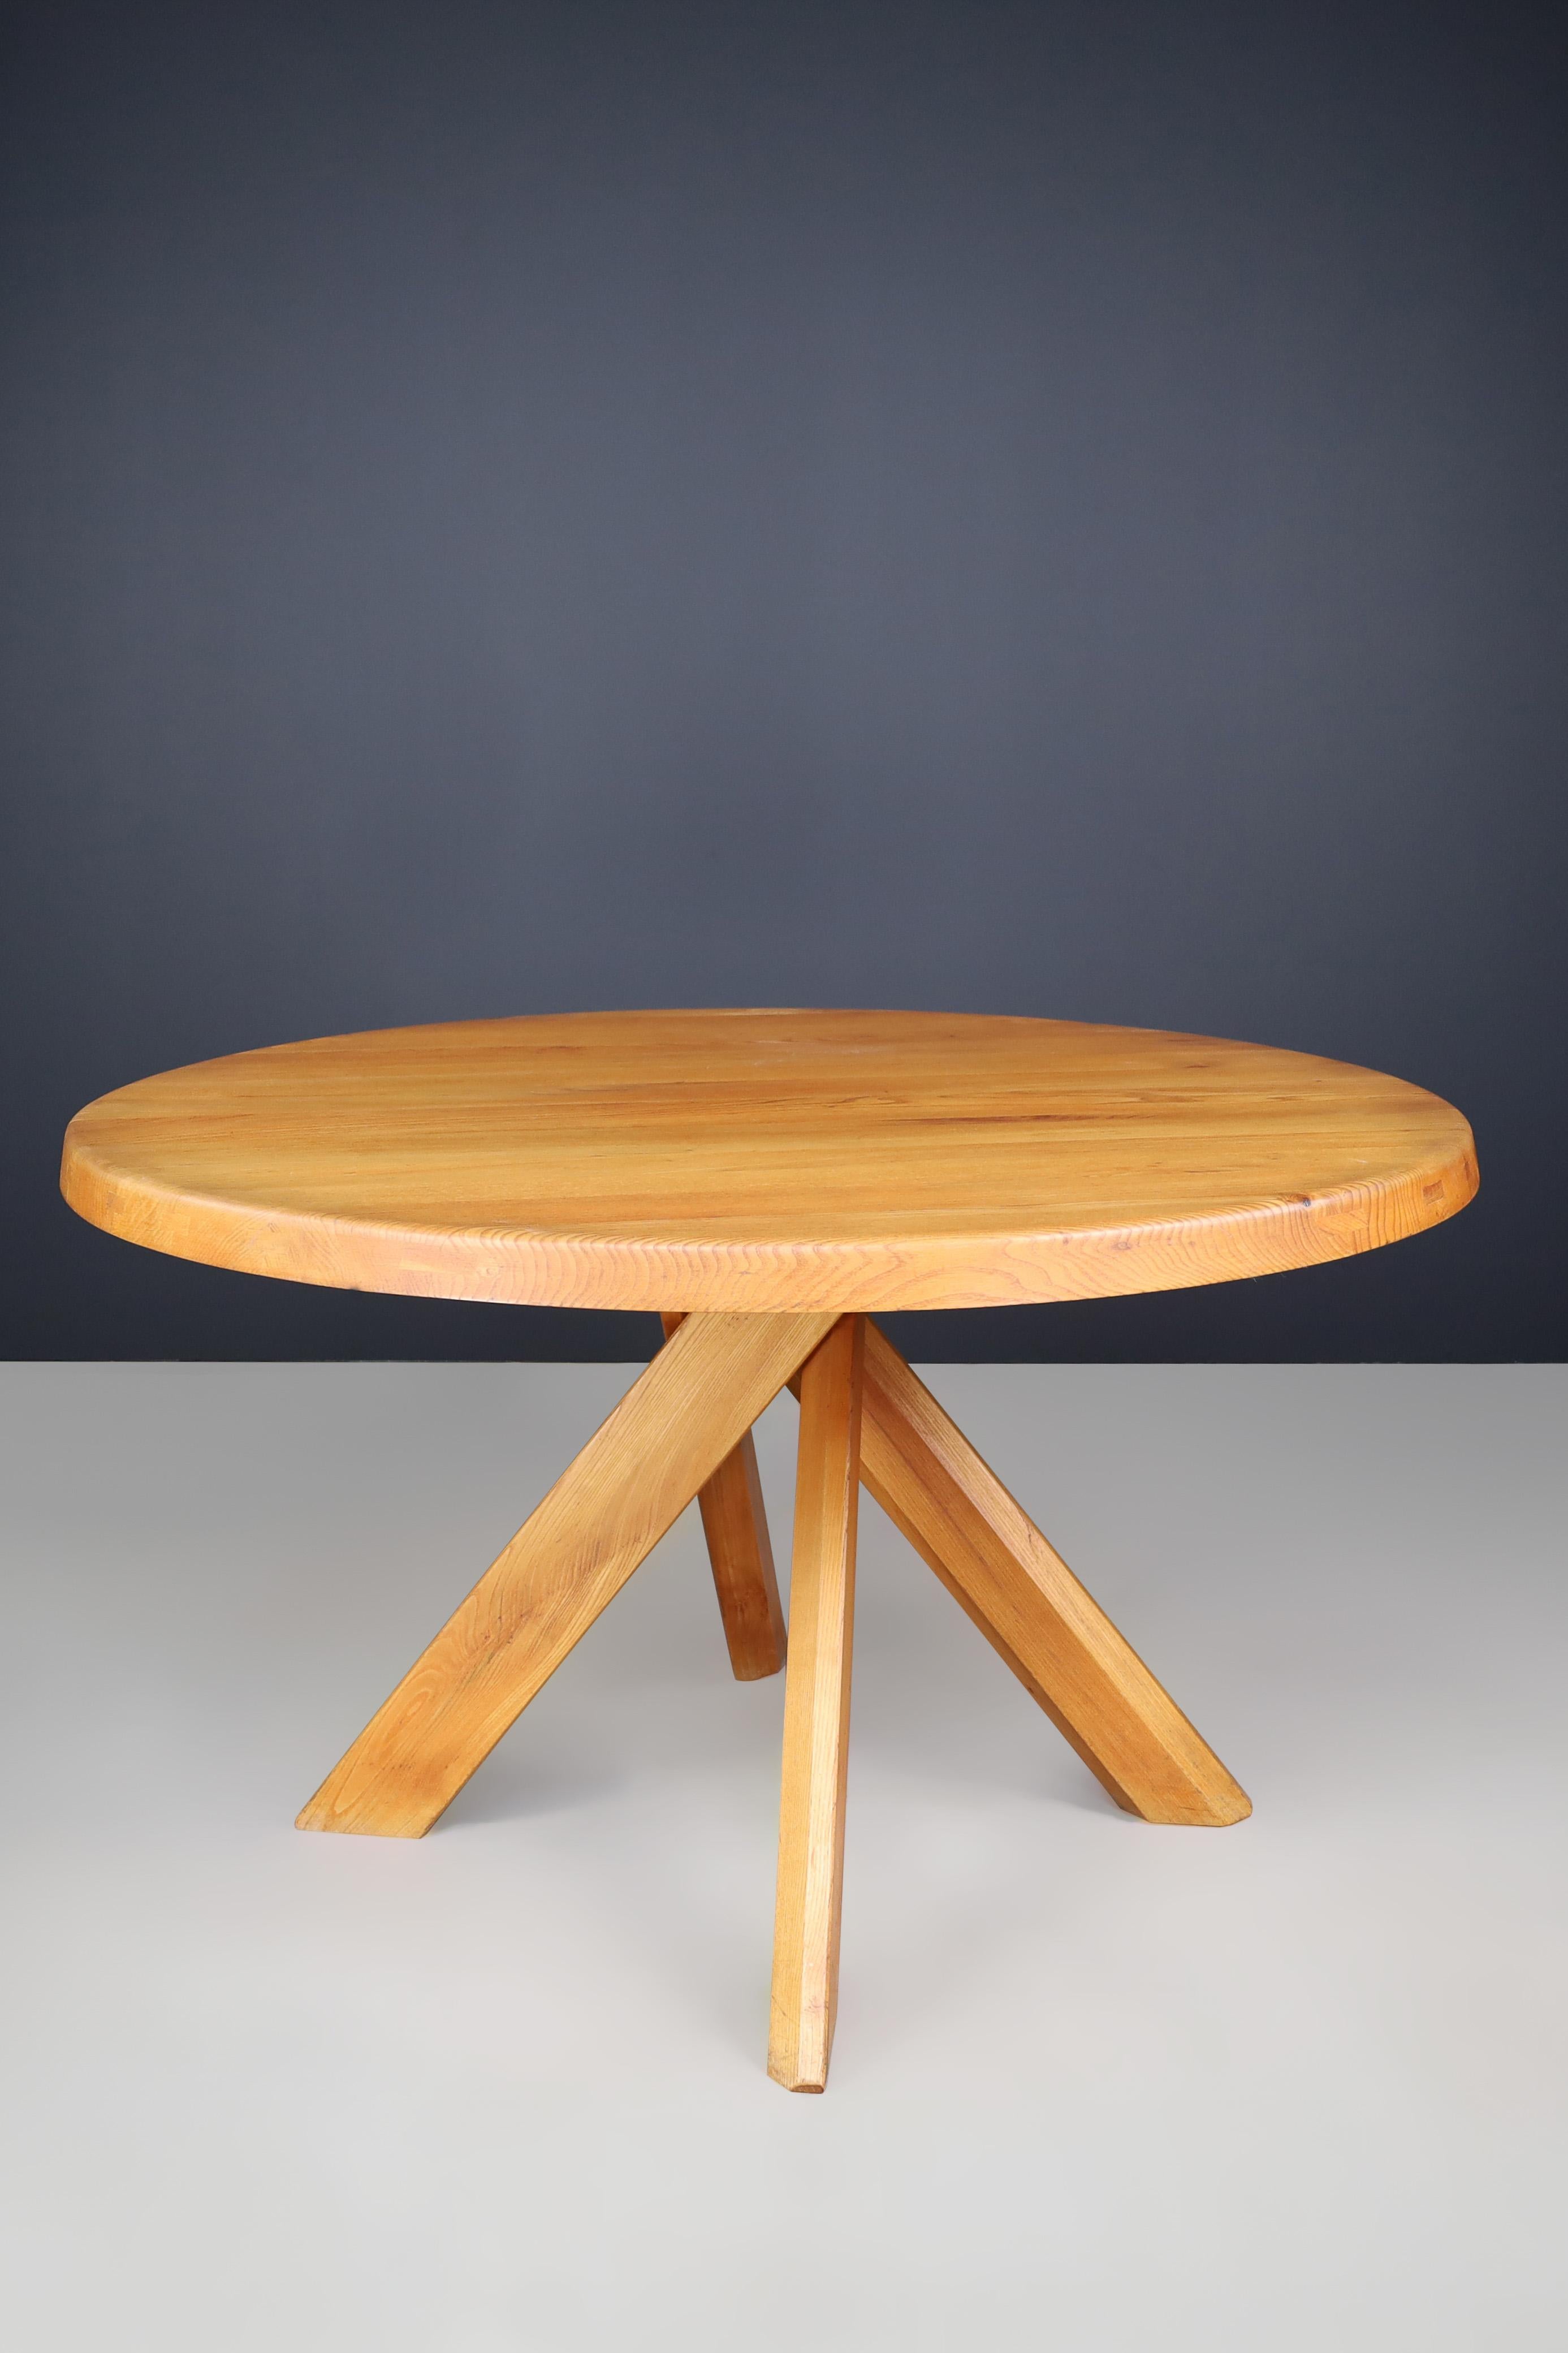 Pierre Chapo 'T21C' Sfax Round Dining Table made of Solid Elm, France 1969 For Sale 3